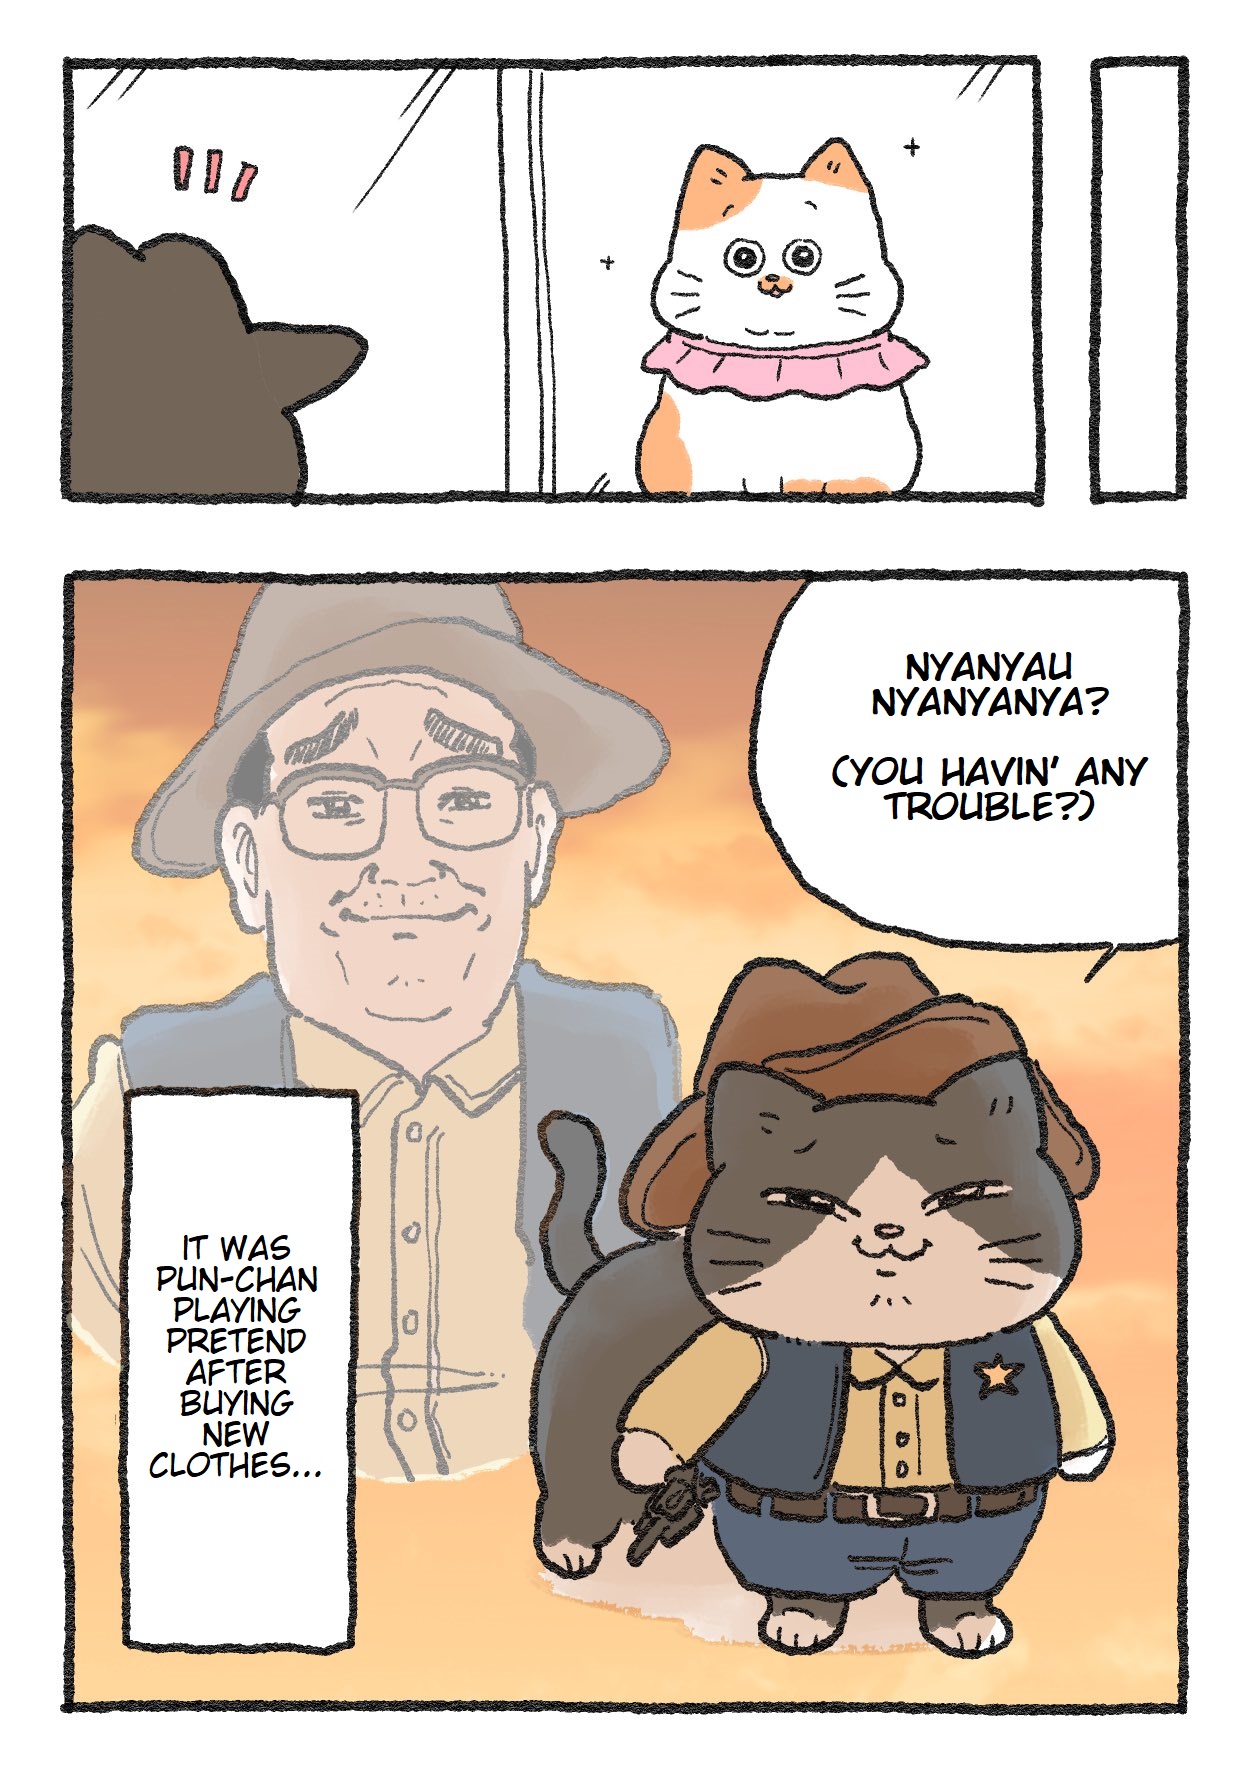 The Old Man Who Was Reincarnated As A Cat - Page 2